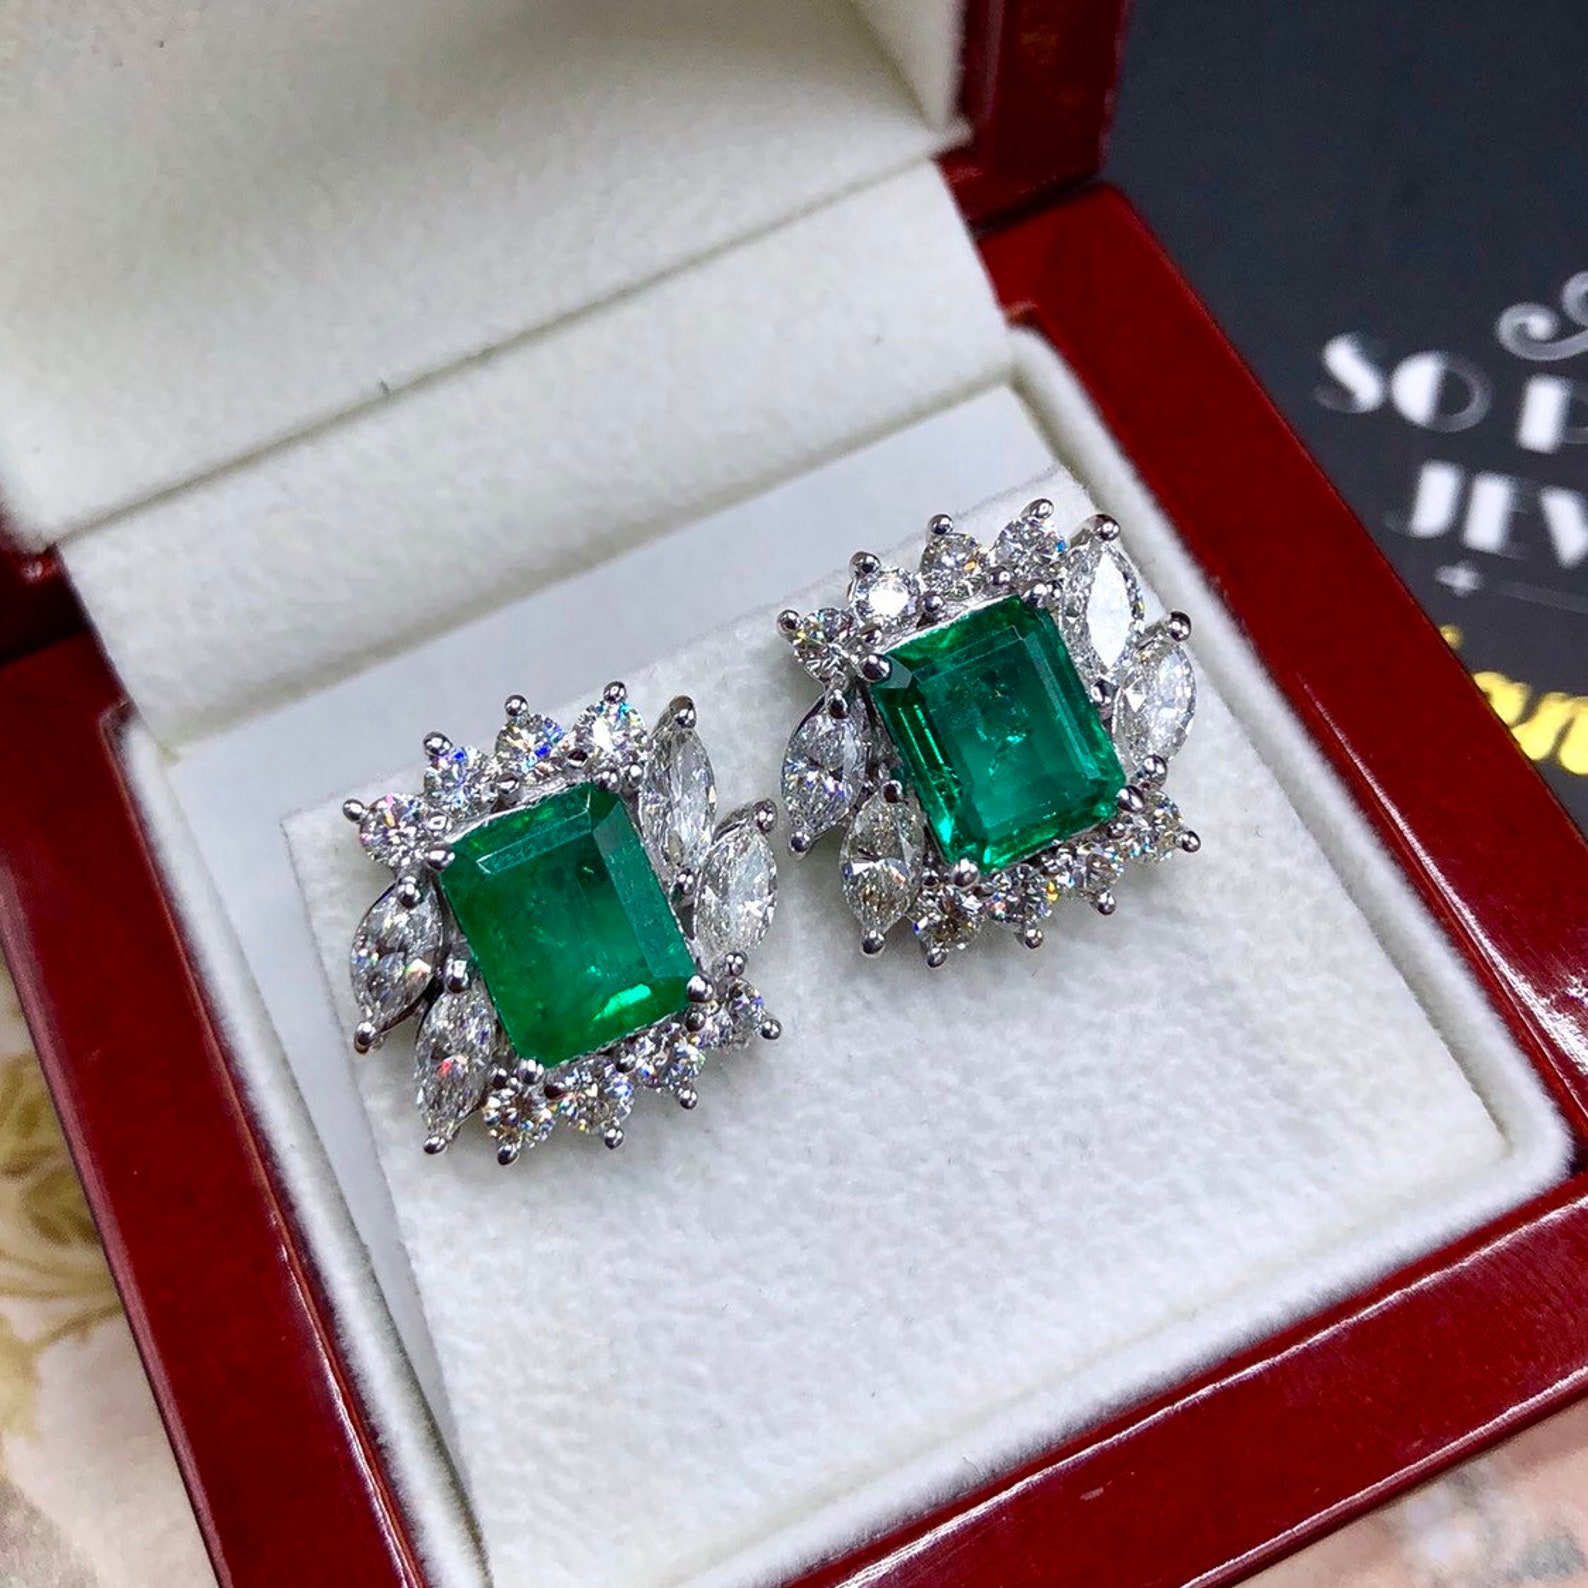 WOW 7.04TCW Emerald VS Diamond in 18K Solid White Gold | Etsy